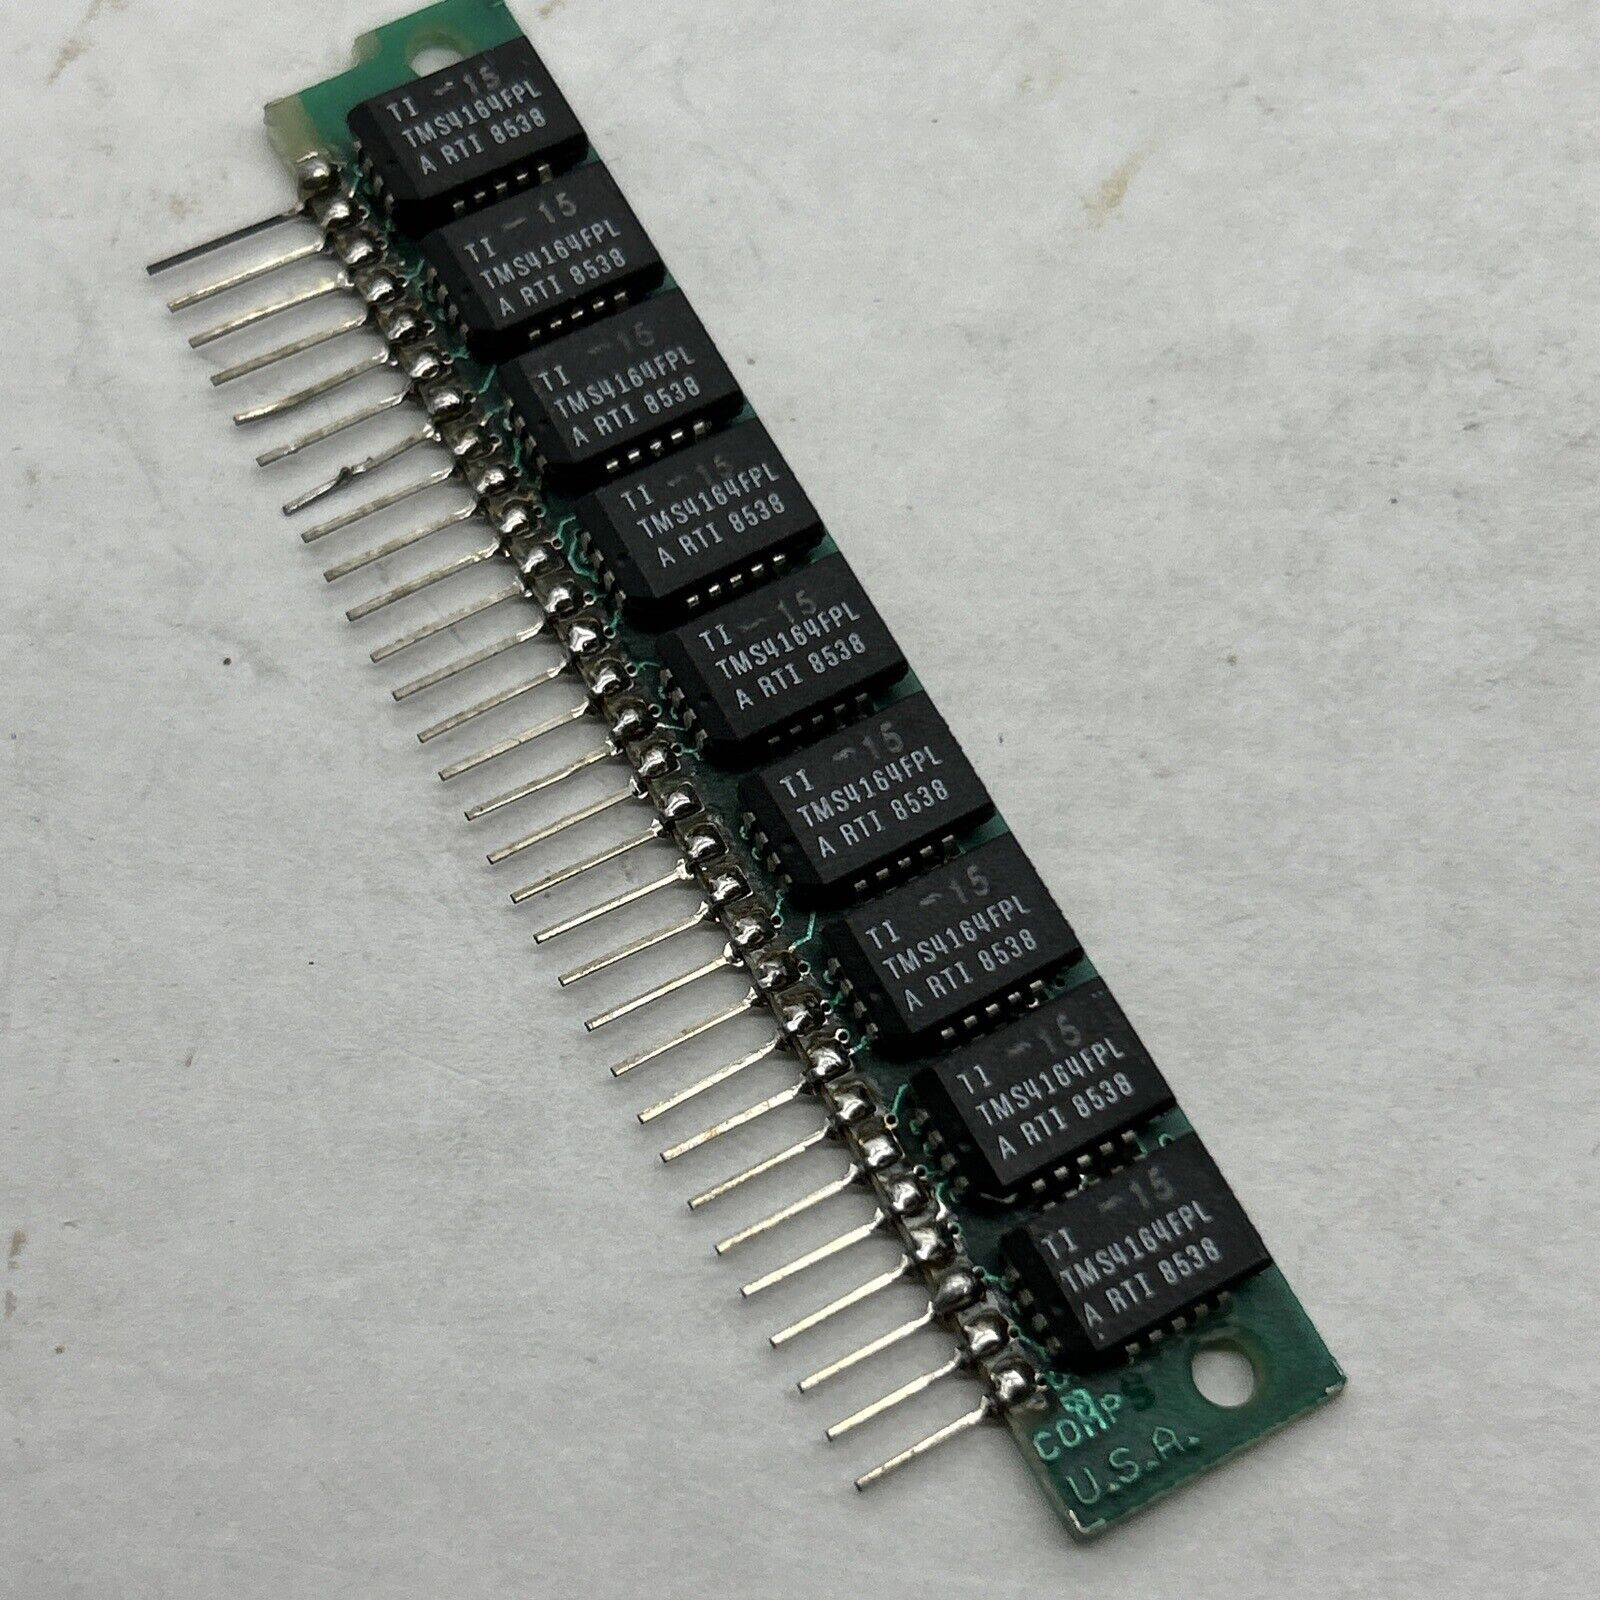 64k byte SIPP Memory Module, 150ns Parity 9 Chip 256x9 Very Rare Sipps